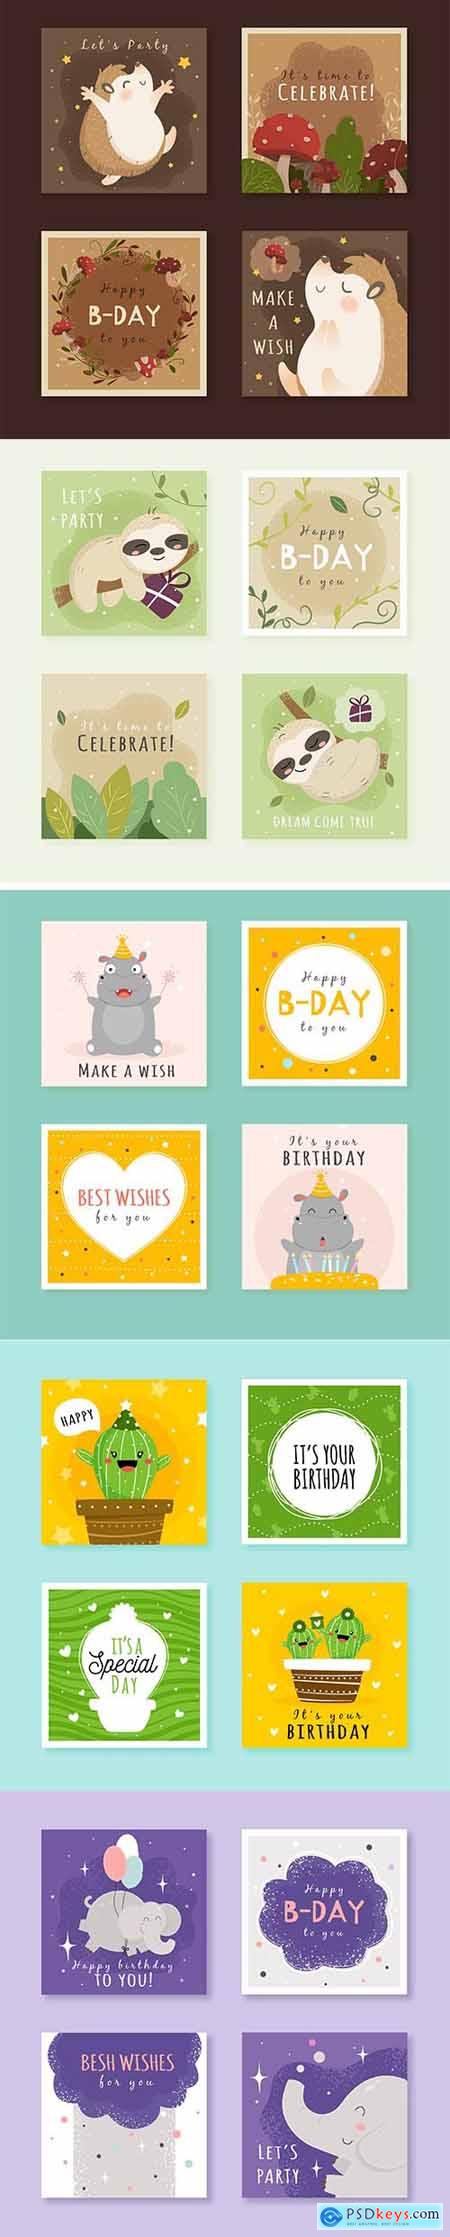 Birthday Cards with Colorful Party Elements